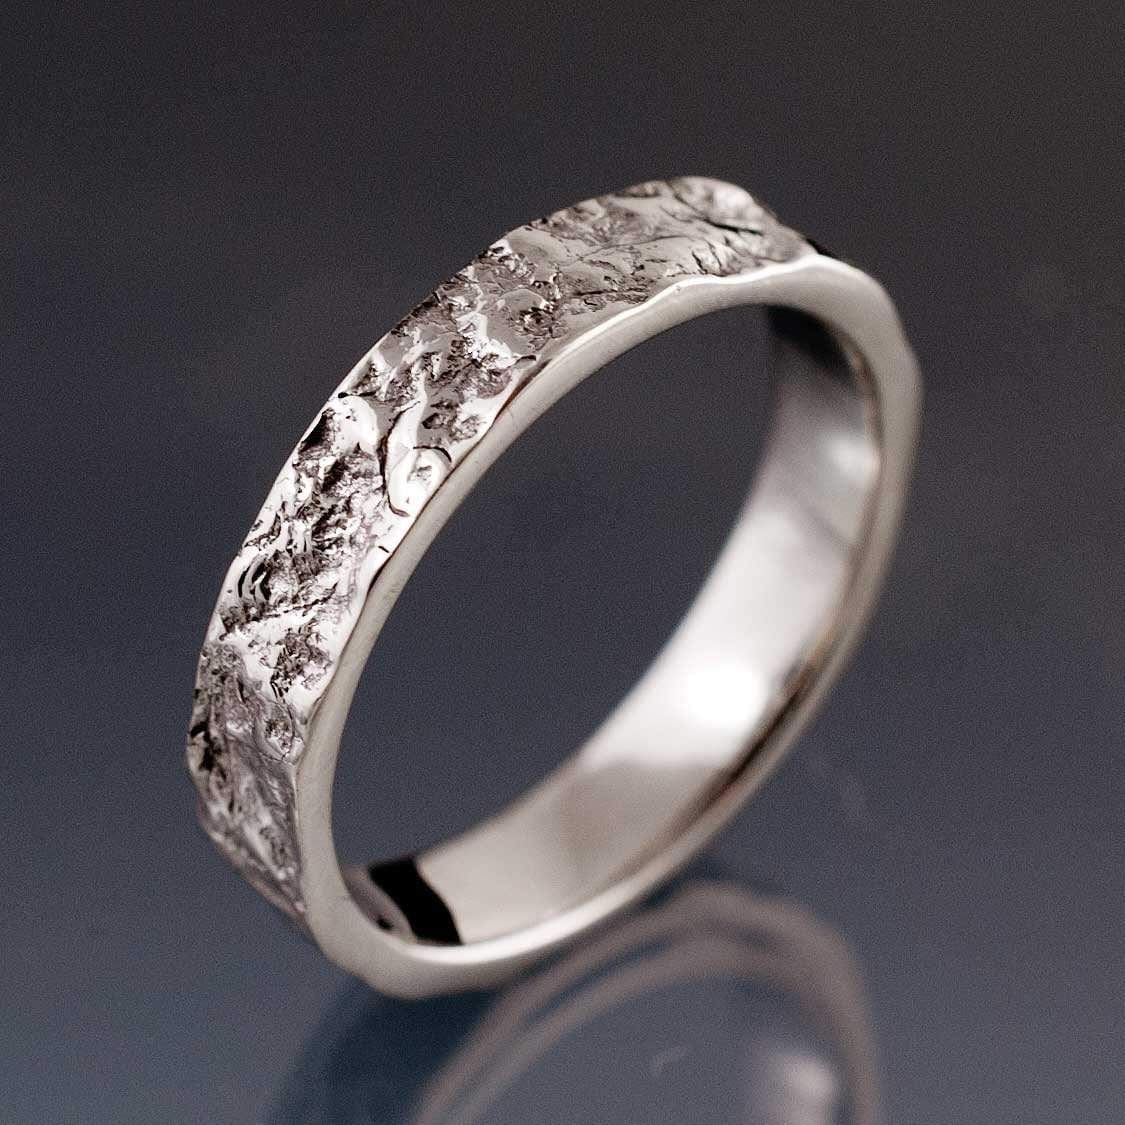 Bush-hammered Marble Texture Wedding Bands, Set of 2 Rings